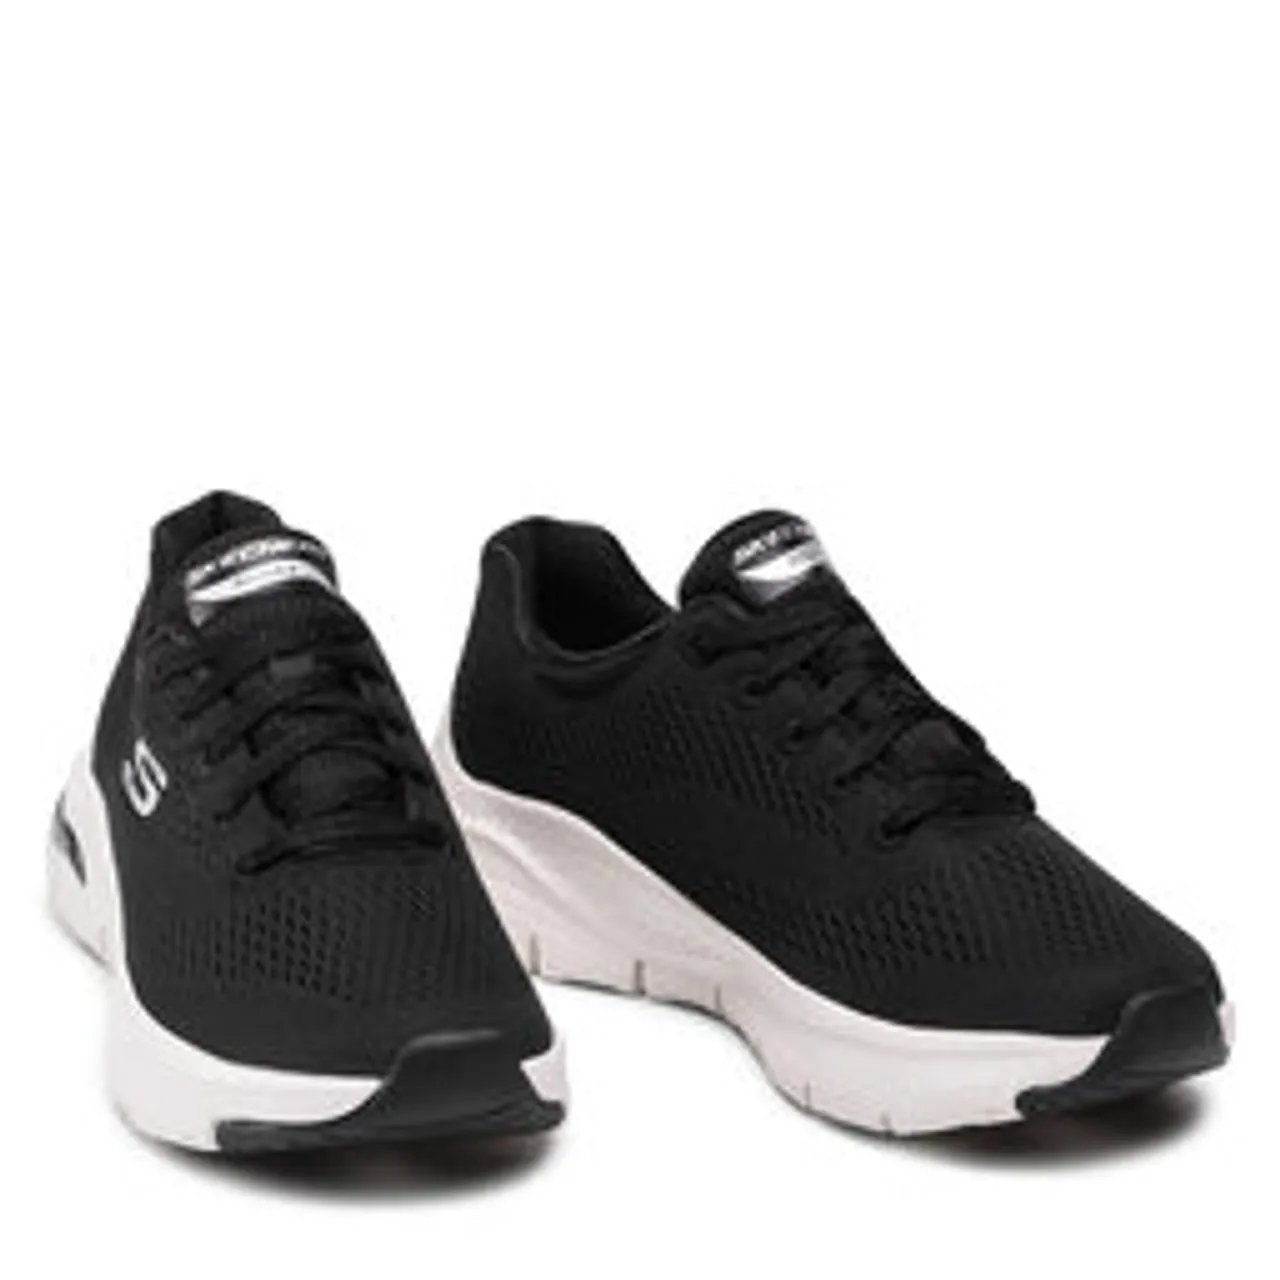 Sneakers Skechers Arch Fit 149057/BKW Black/White